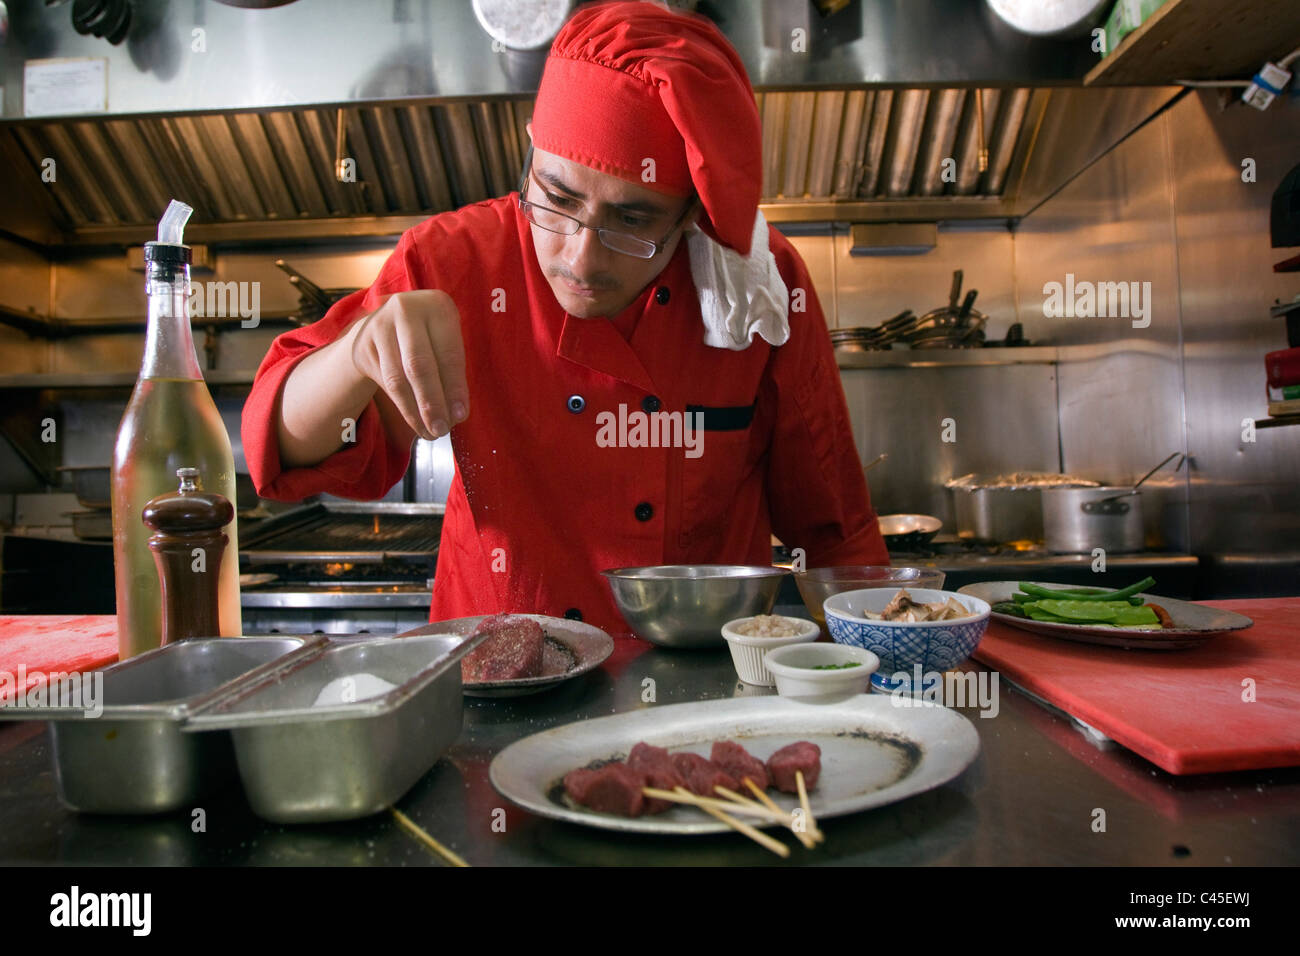 A chef prepares a kangaroo steak in a New York restaurant after a ban on serving the meat was lifted. Stock Photo